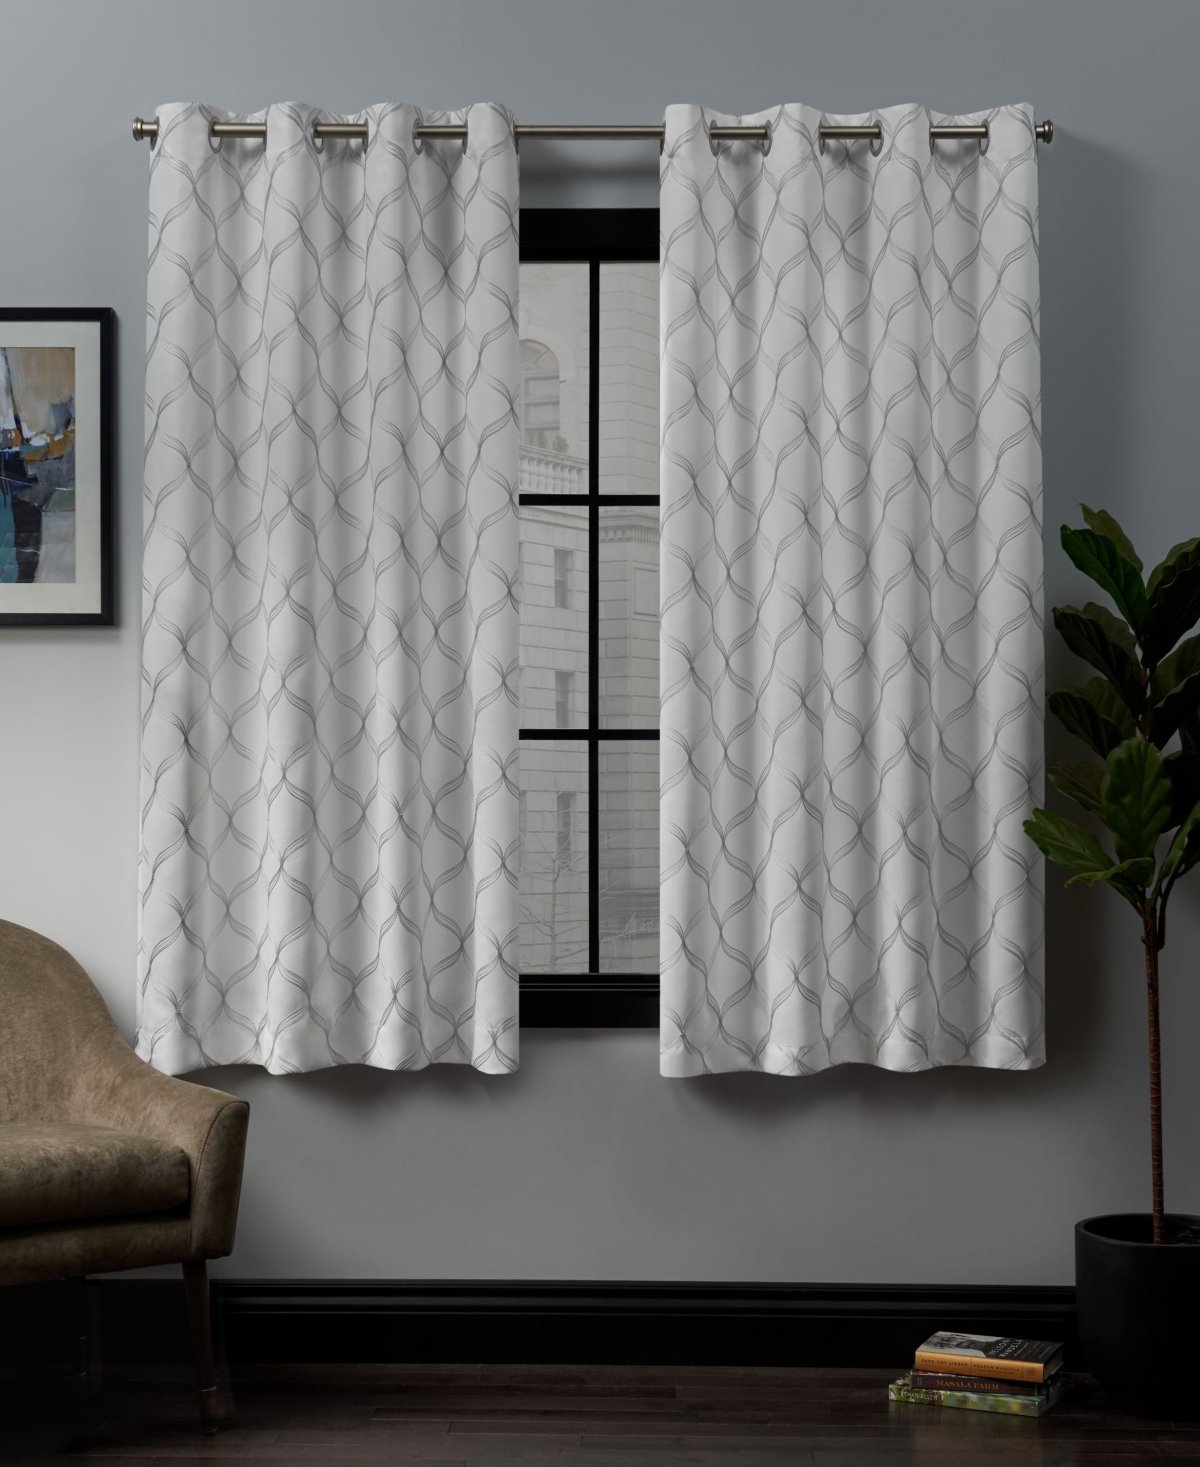 Amelia Embroidered Woven Blackout Grommet Top Curtain Panel Pair, 52" x 63" - White